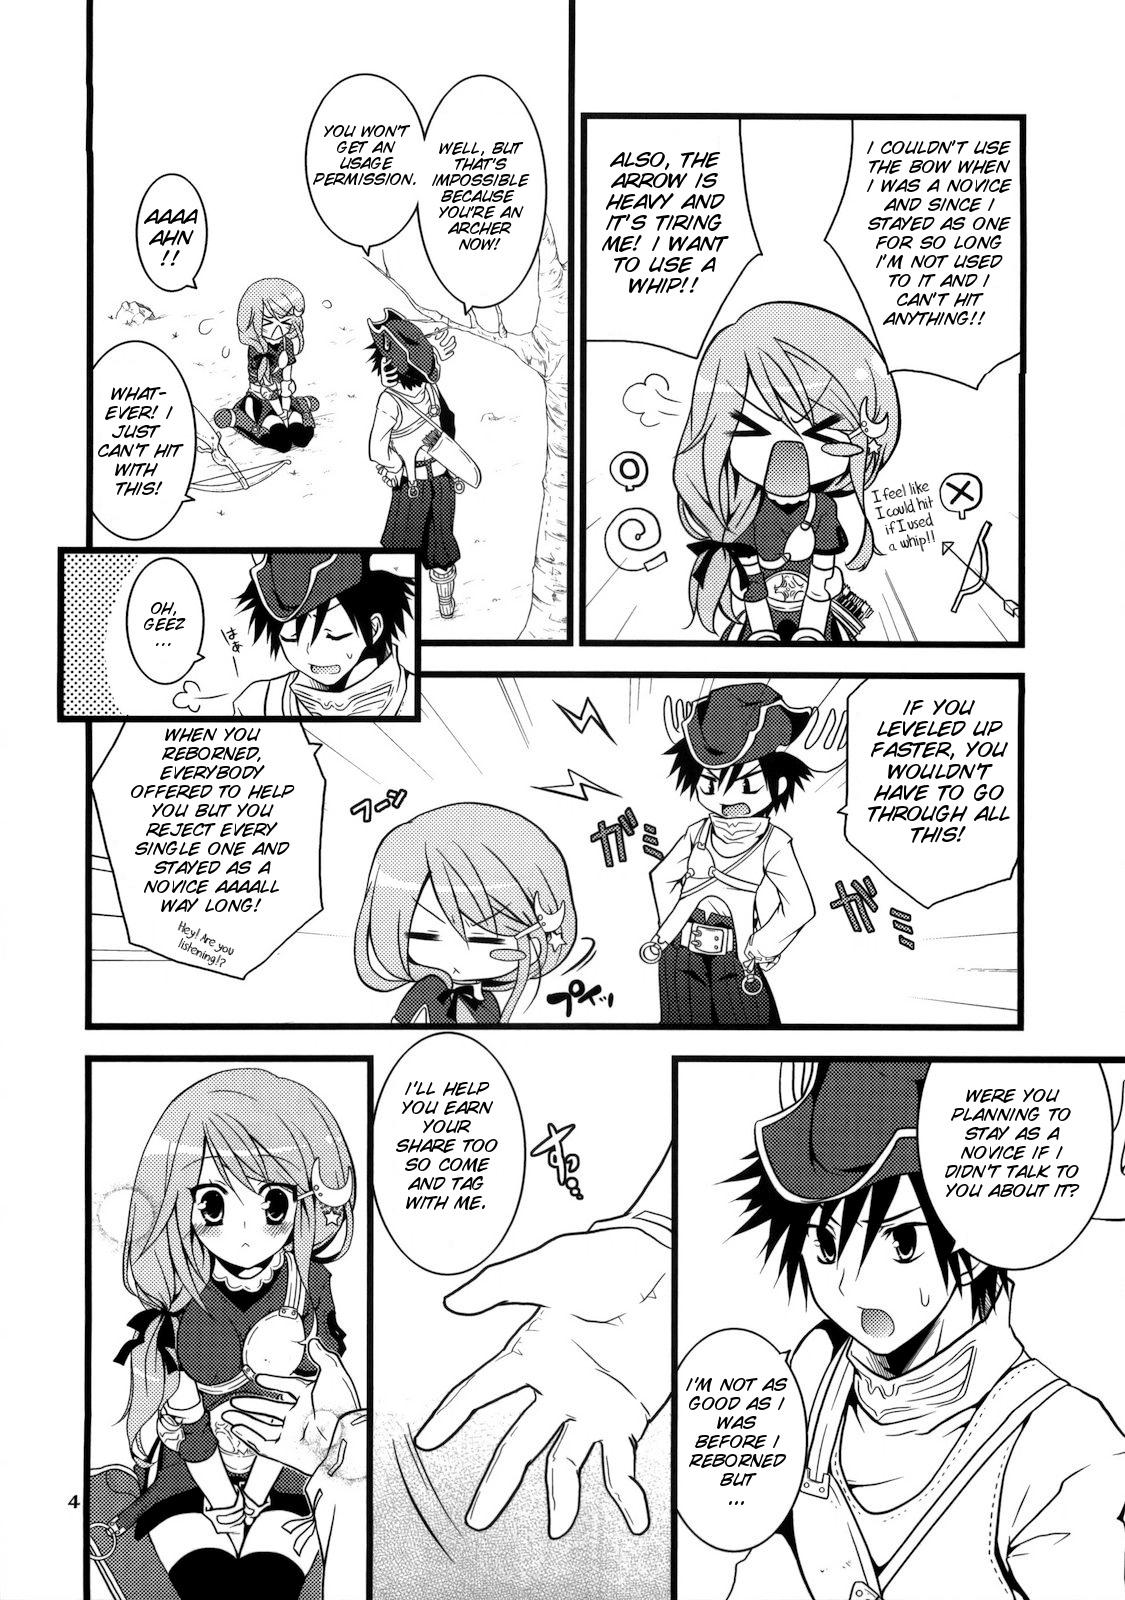 Family Daily RO 3 - Ragnarok online Daddy - Page 6